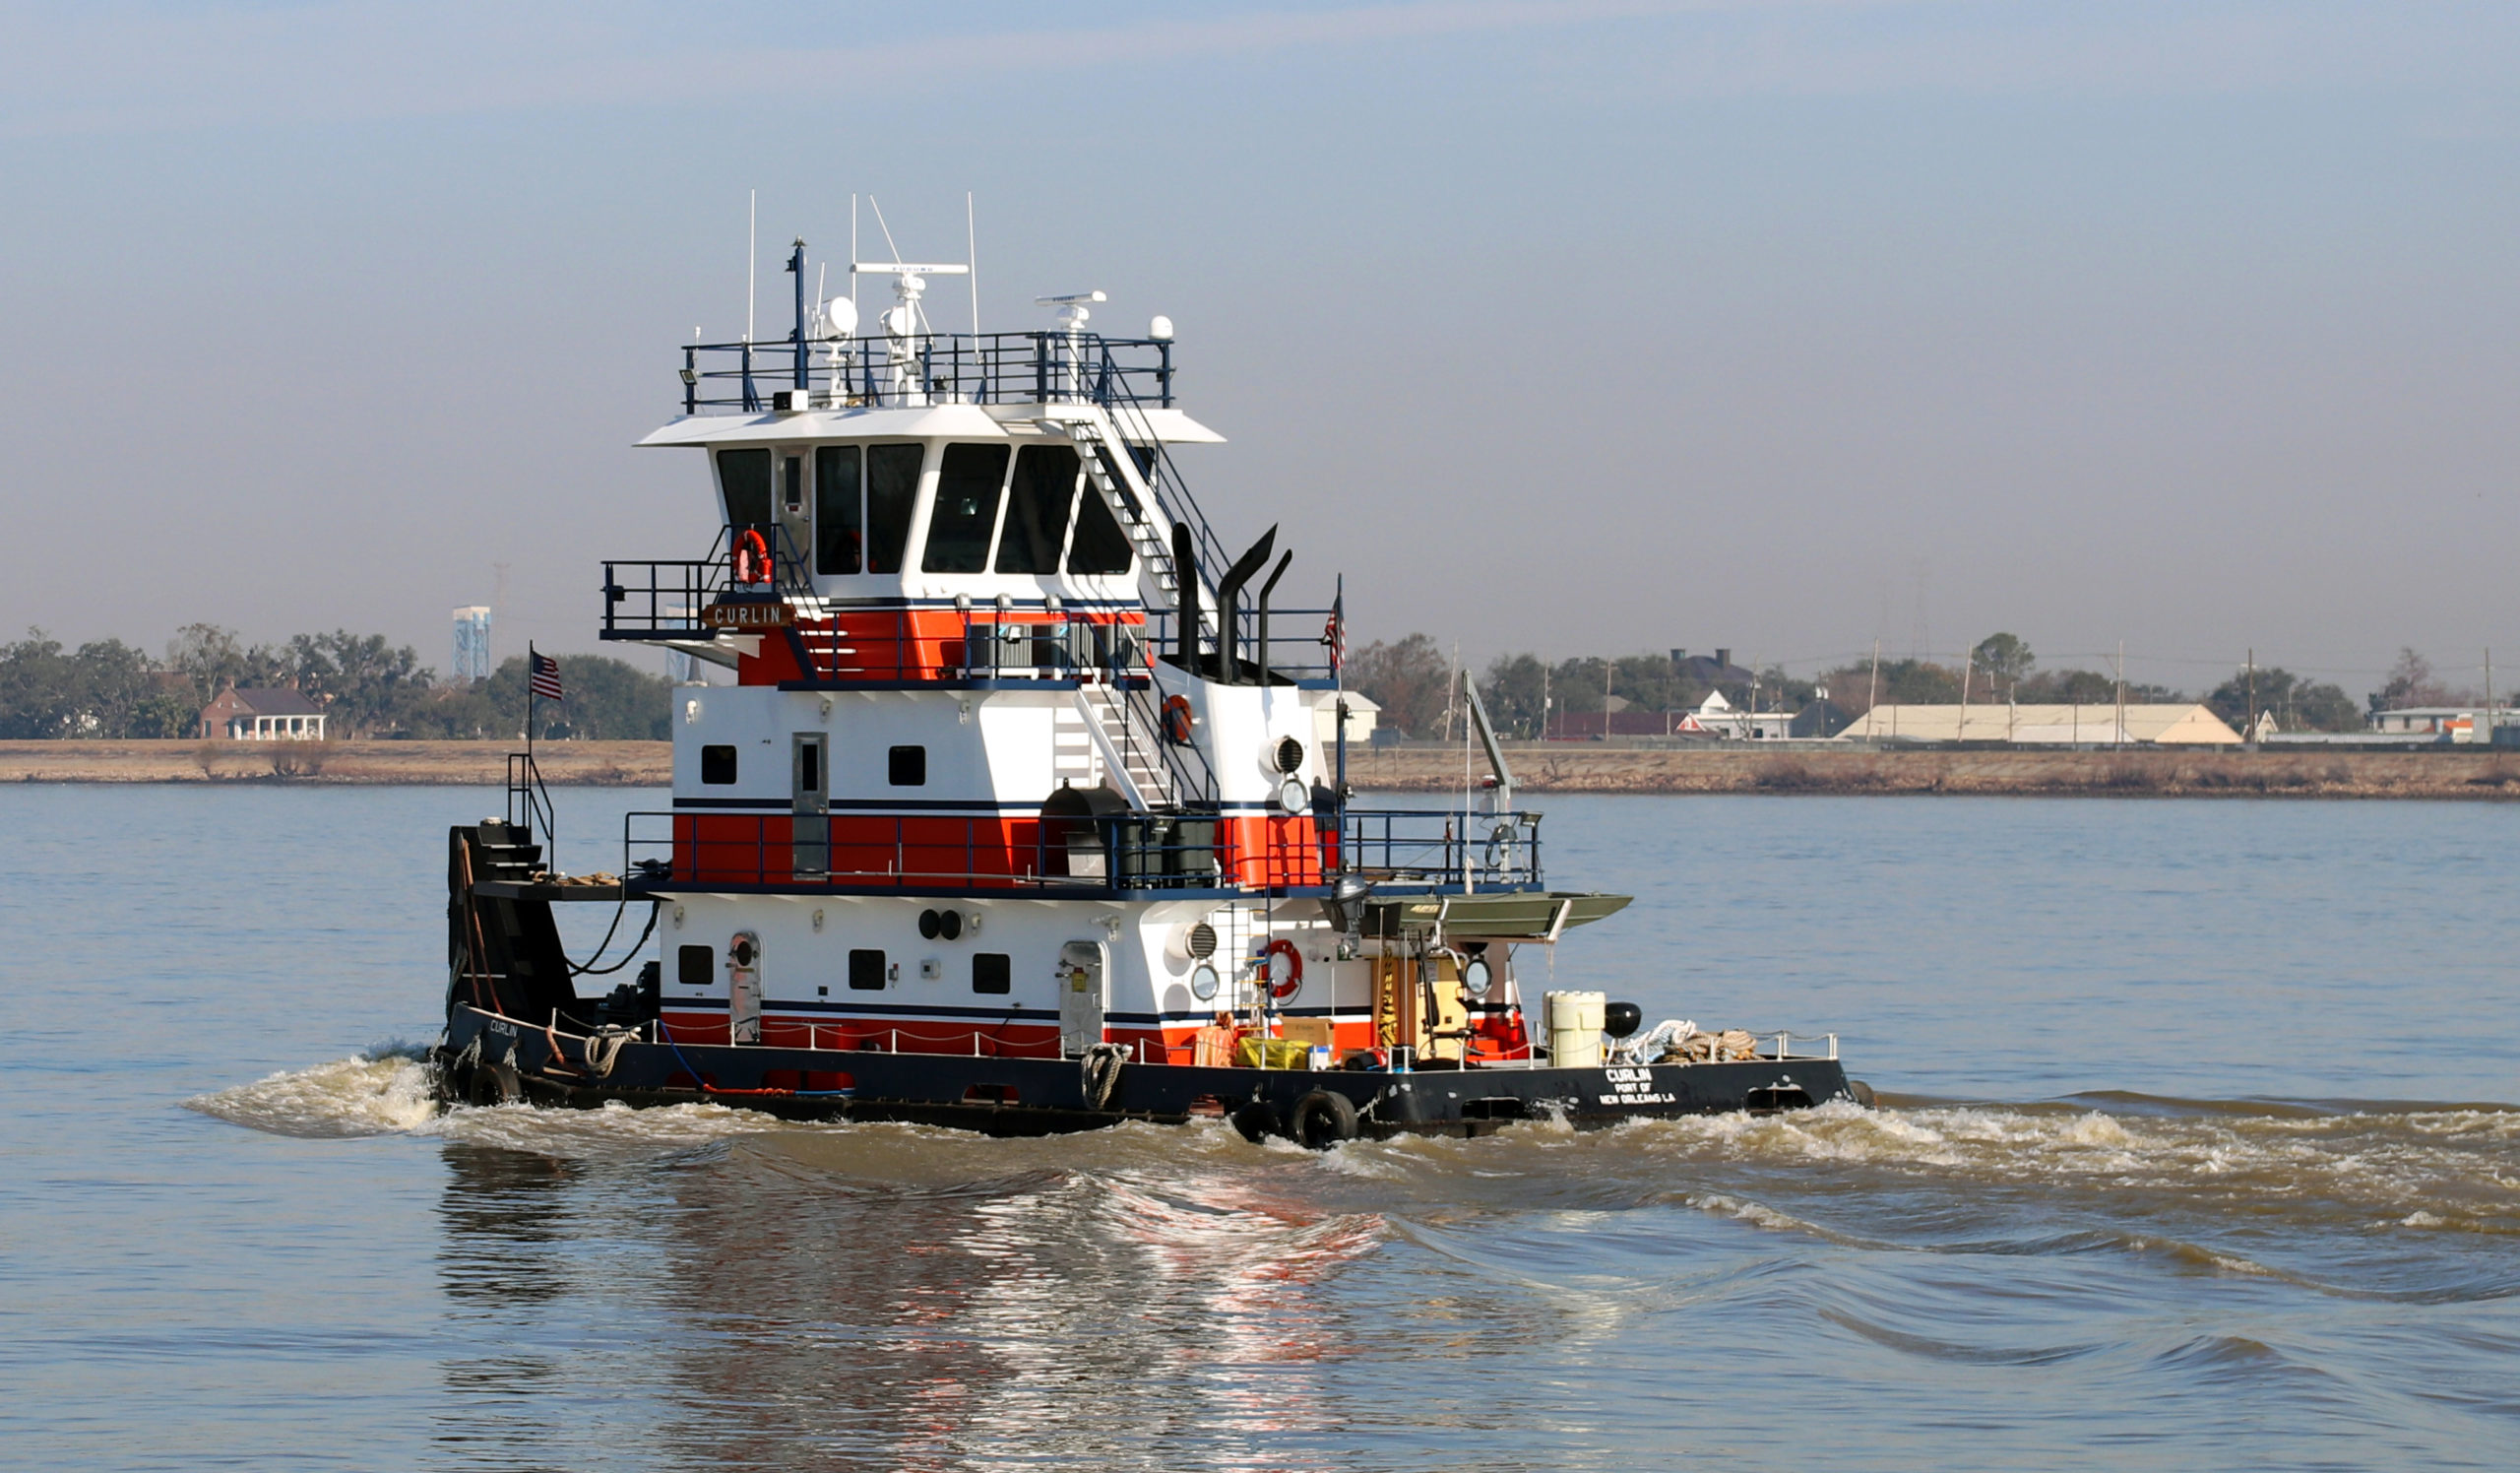 Pushboat "Curlin" - Turn Services